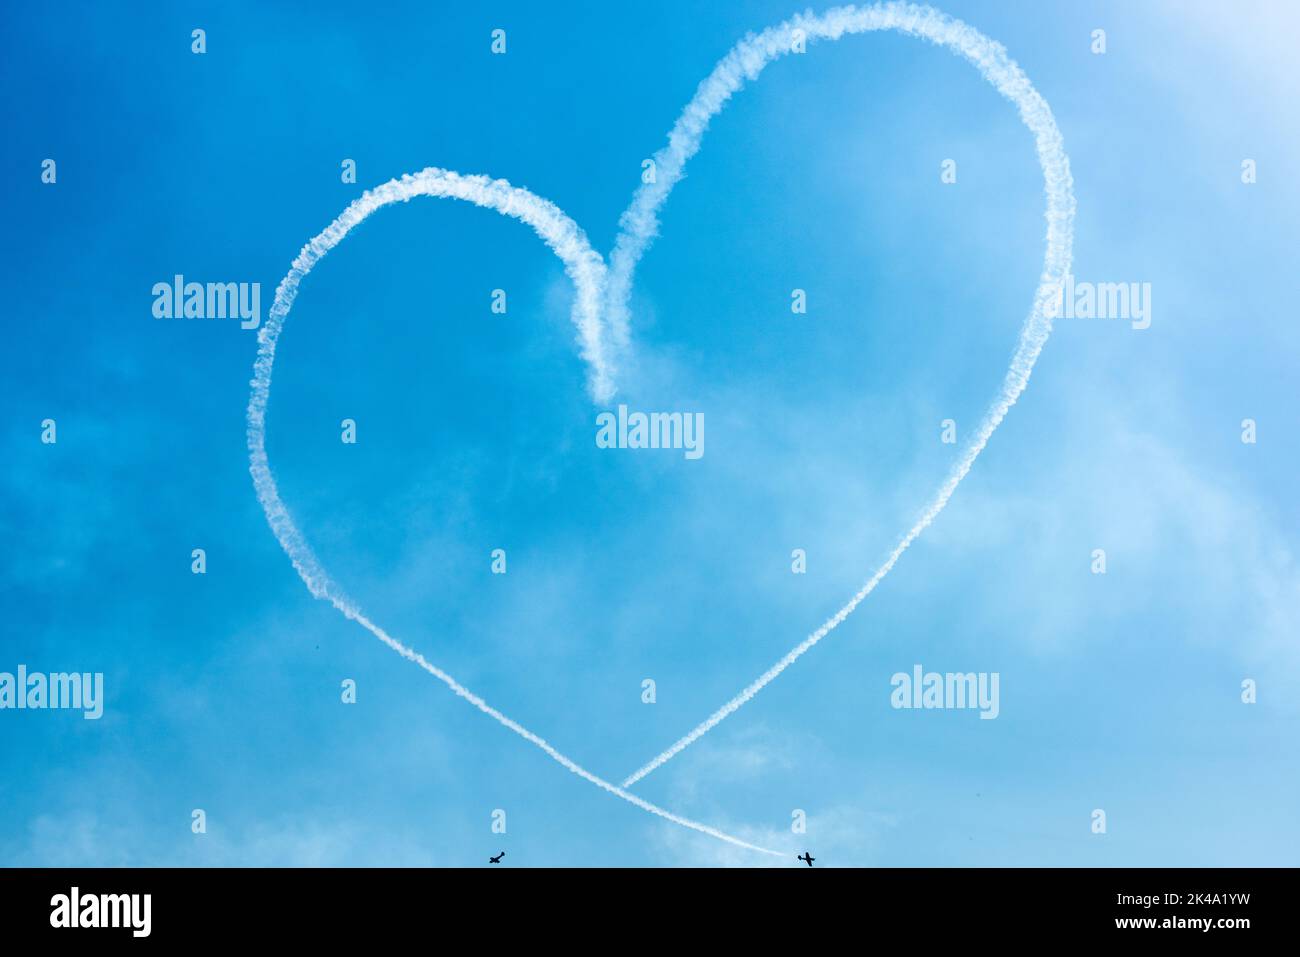 Two Light Airplanes In The Sky Writing Romantic Heart Shape Stock Photo